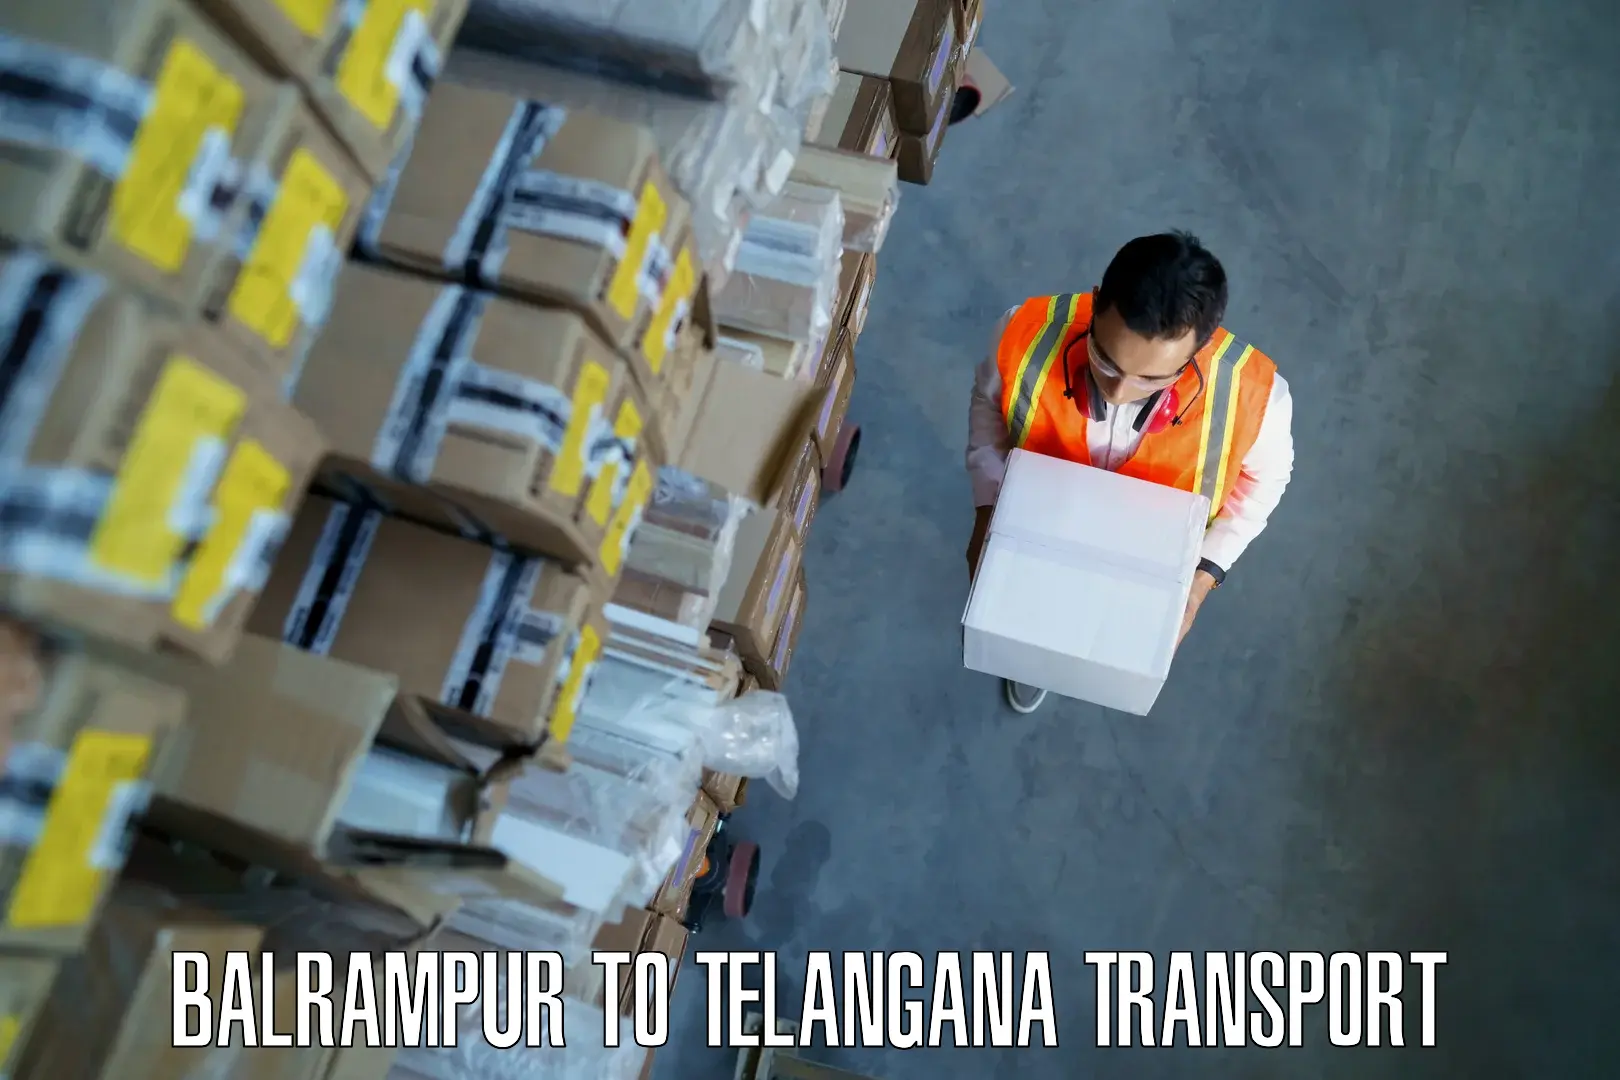 Container transport service Balrampur to Kollapur